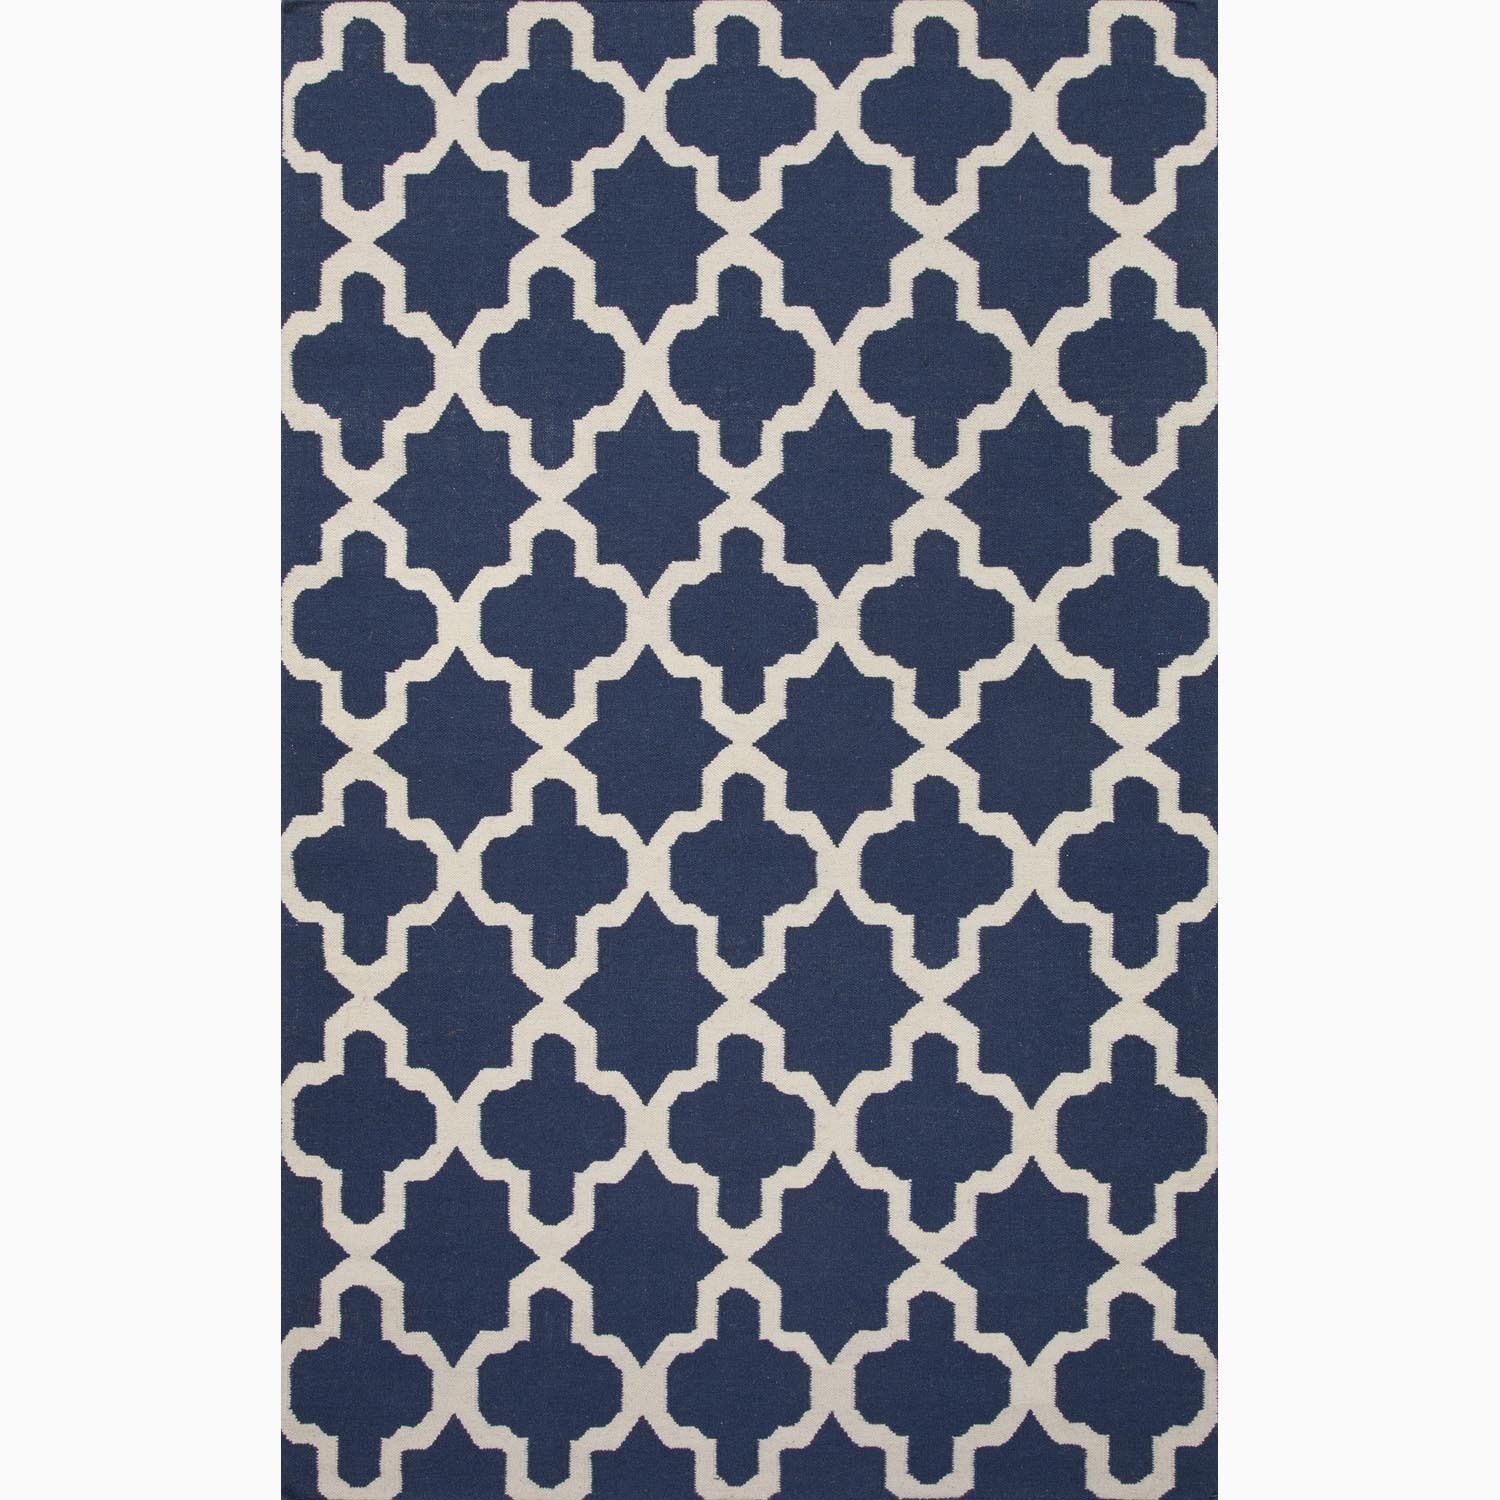 Hand made Moroccan Pattern Blue/ Ivory Wool Rug (2x3)